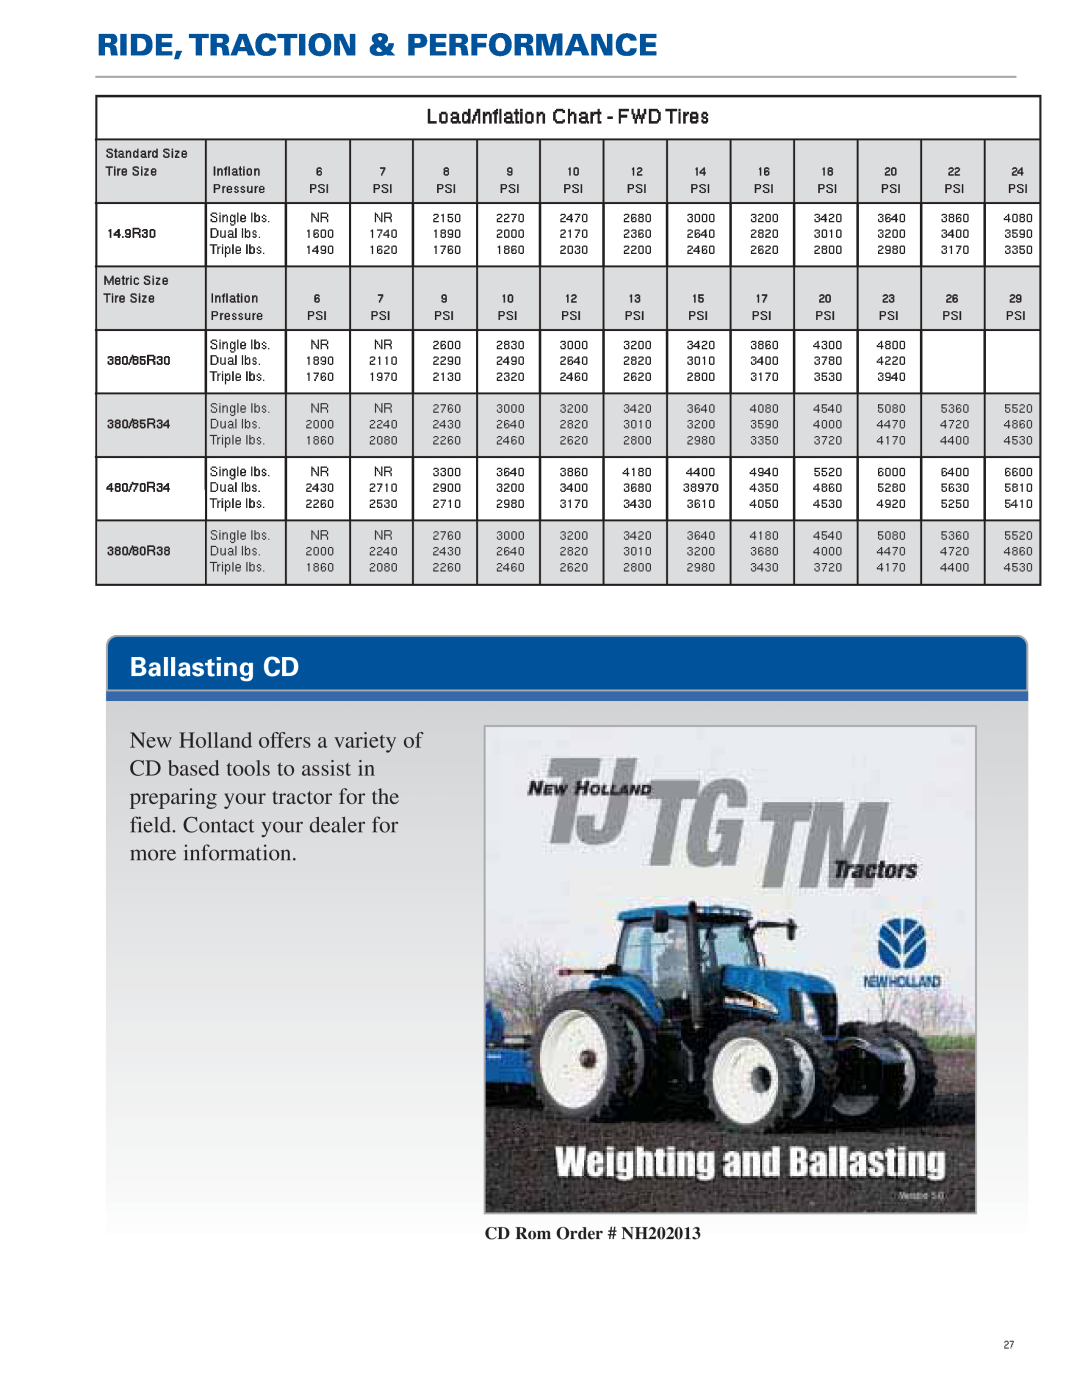 New Holland TG Series manual Ballasting CD, New Holland offers a variety of CD based tools to assist in, more information 